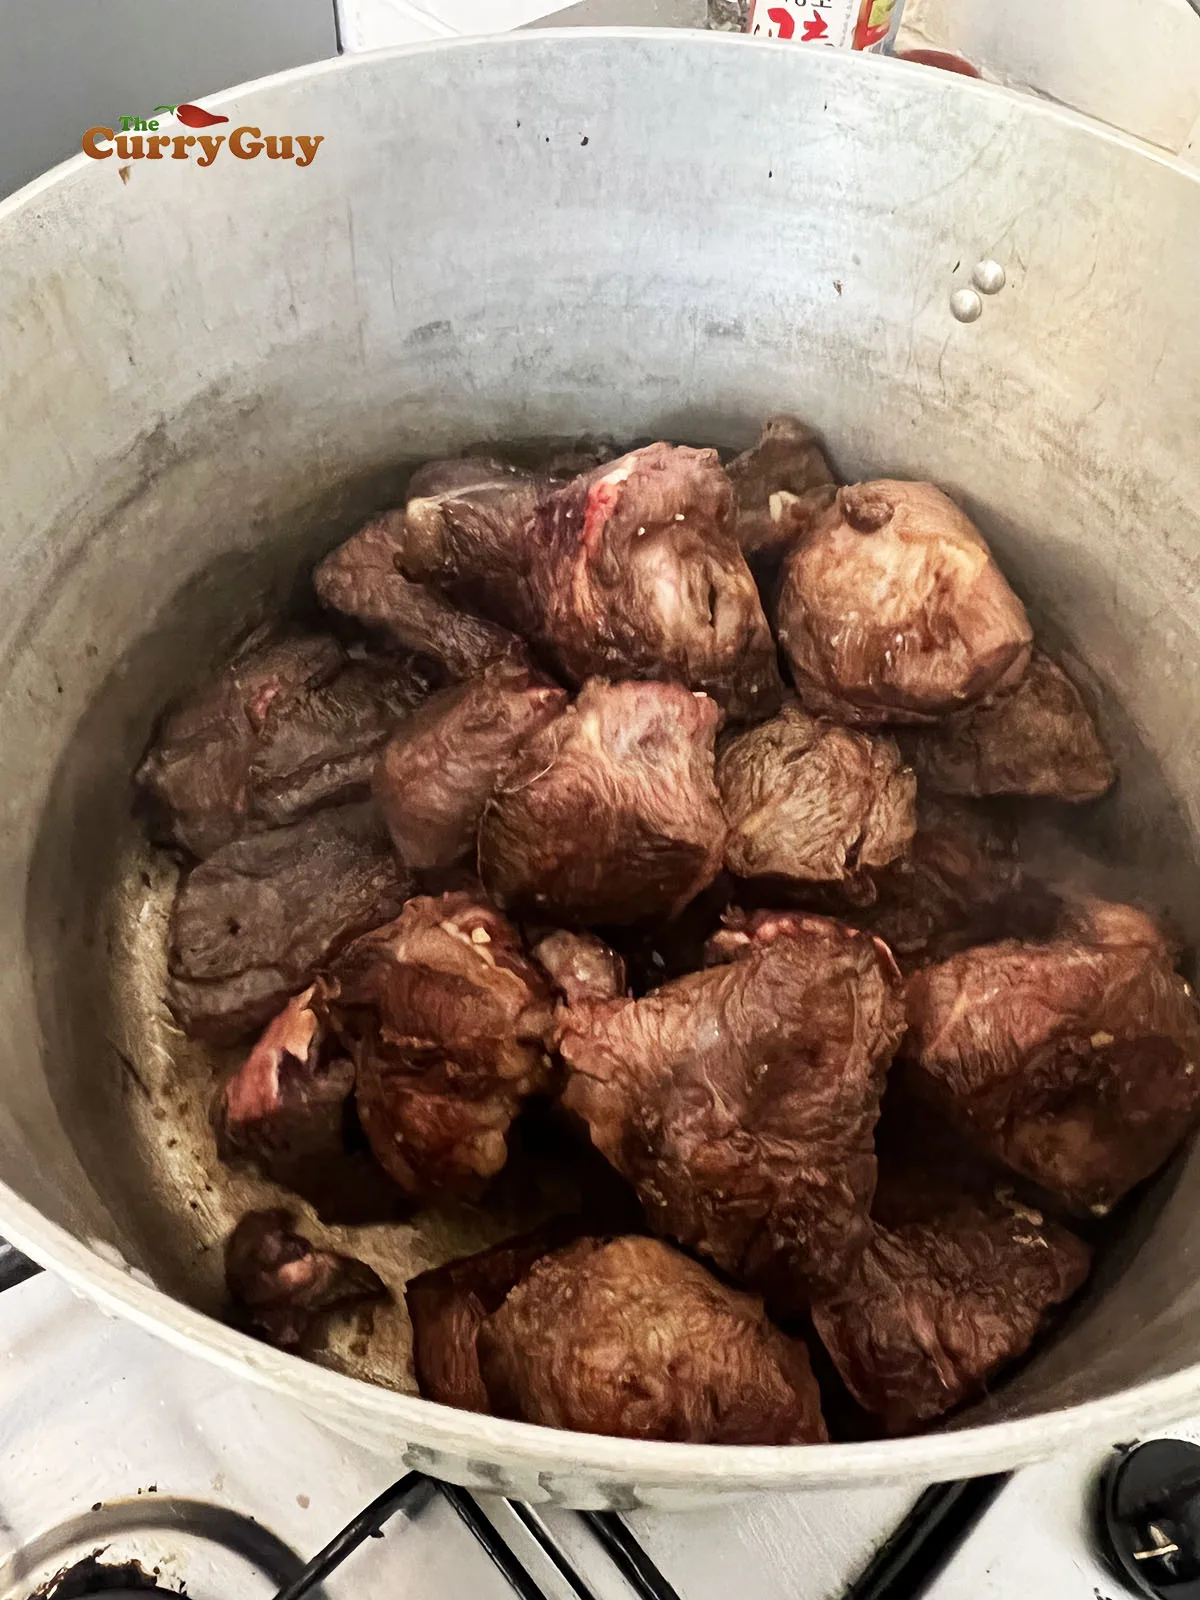 Meat ready for cooking in a pot